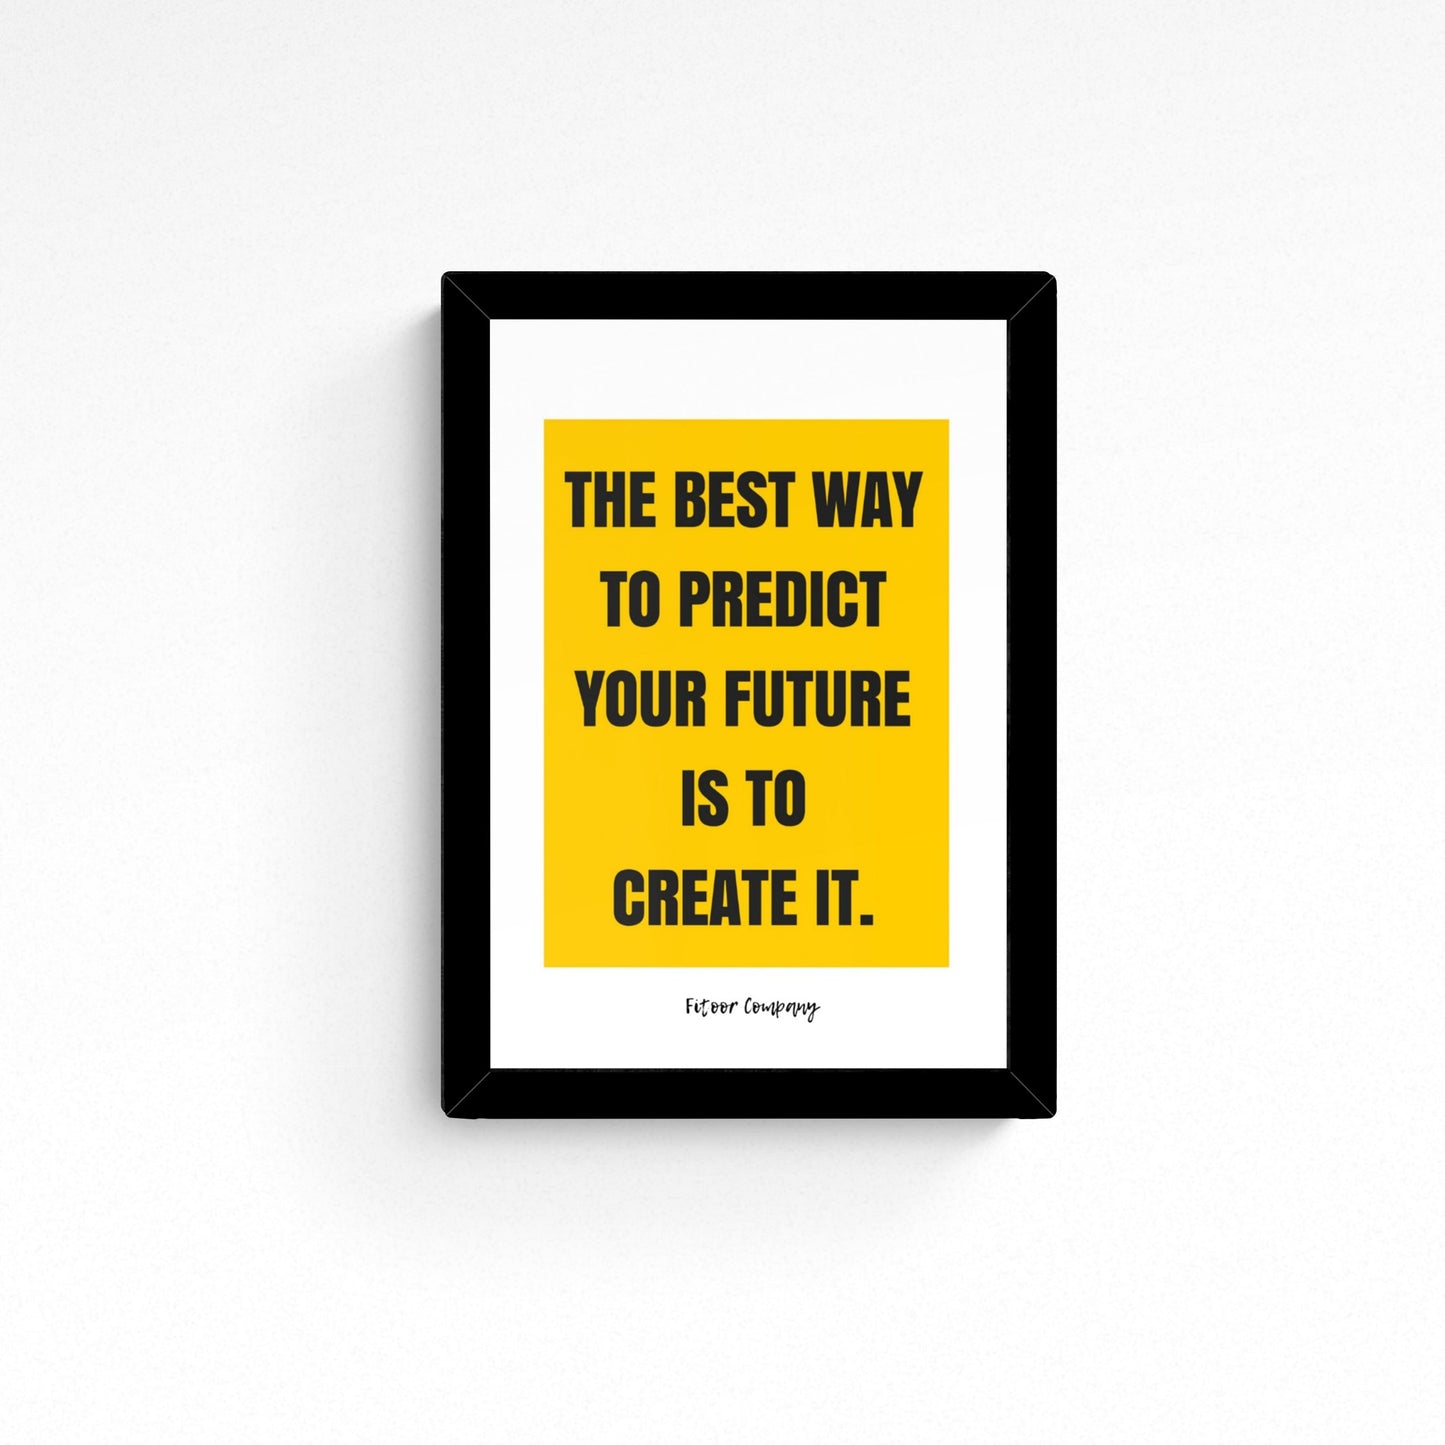 The Best way to predict your future